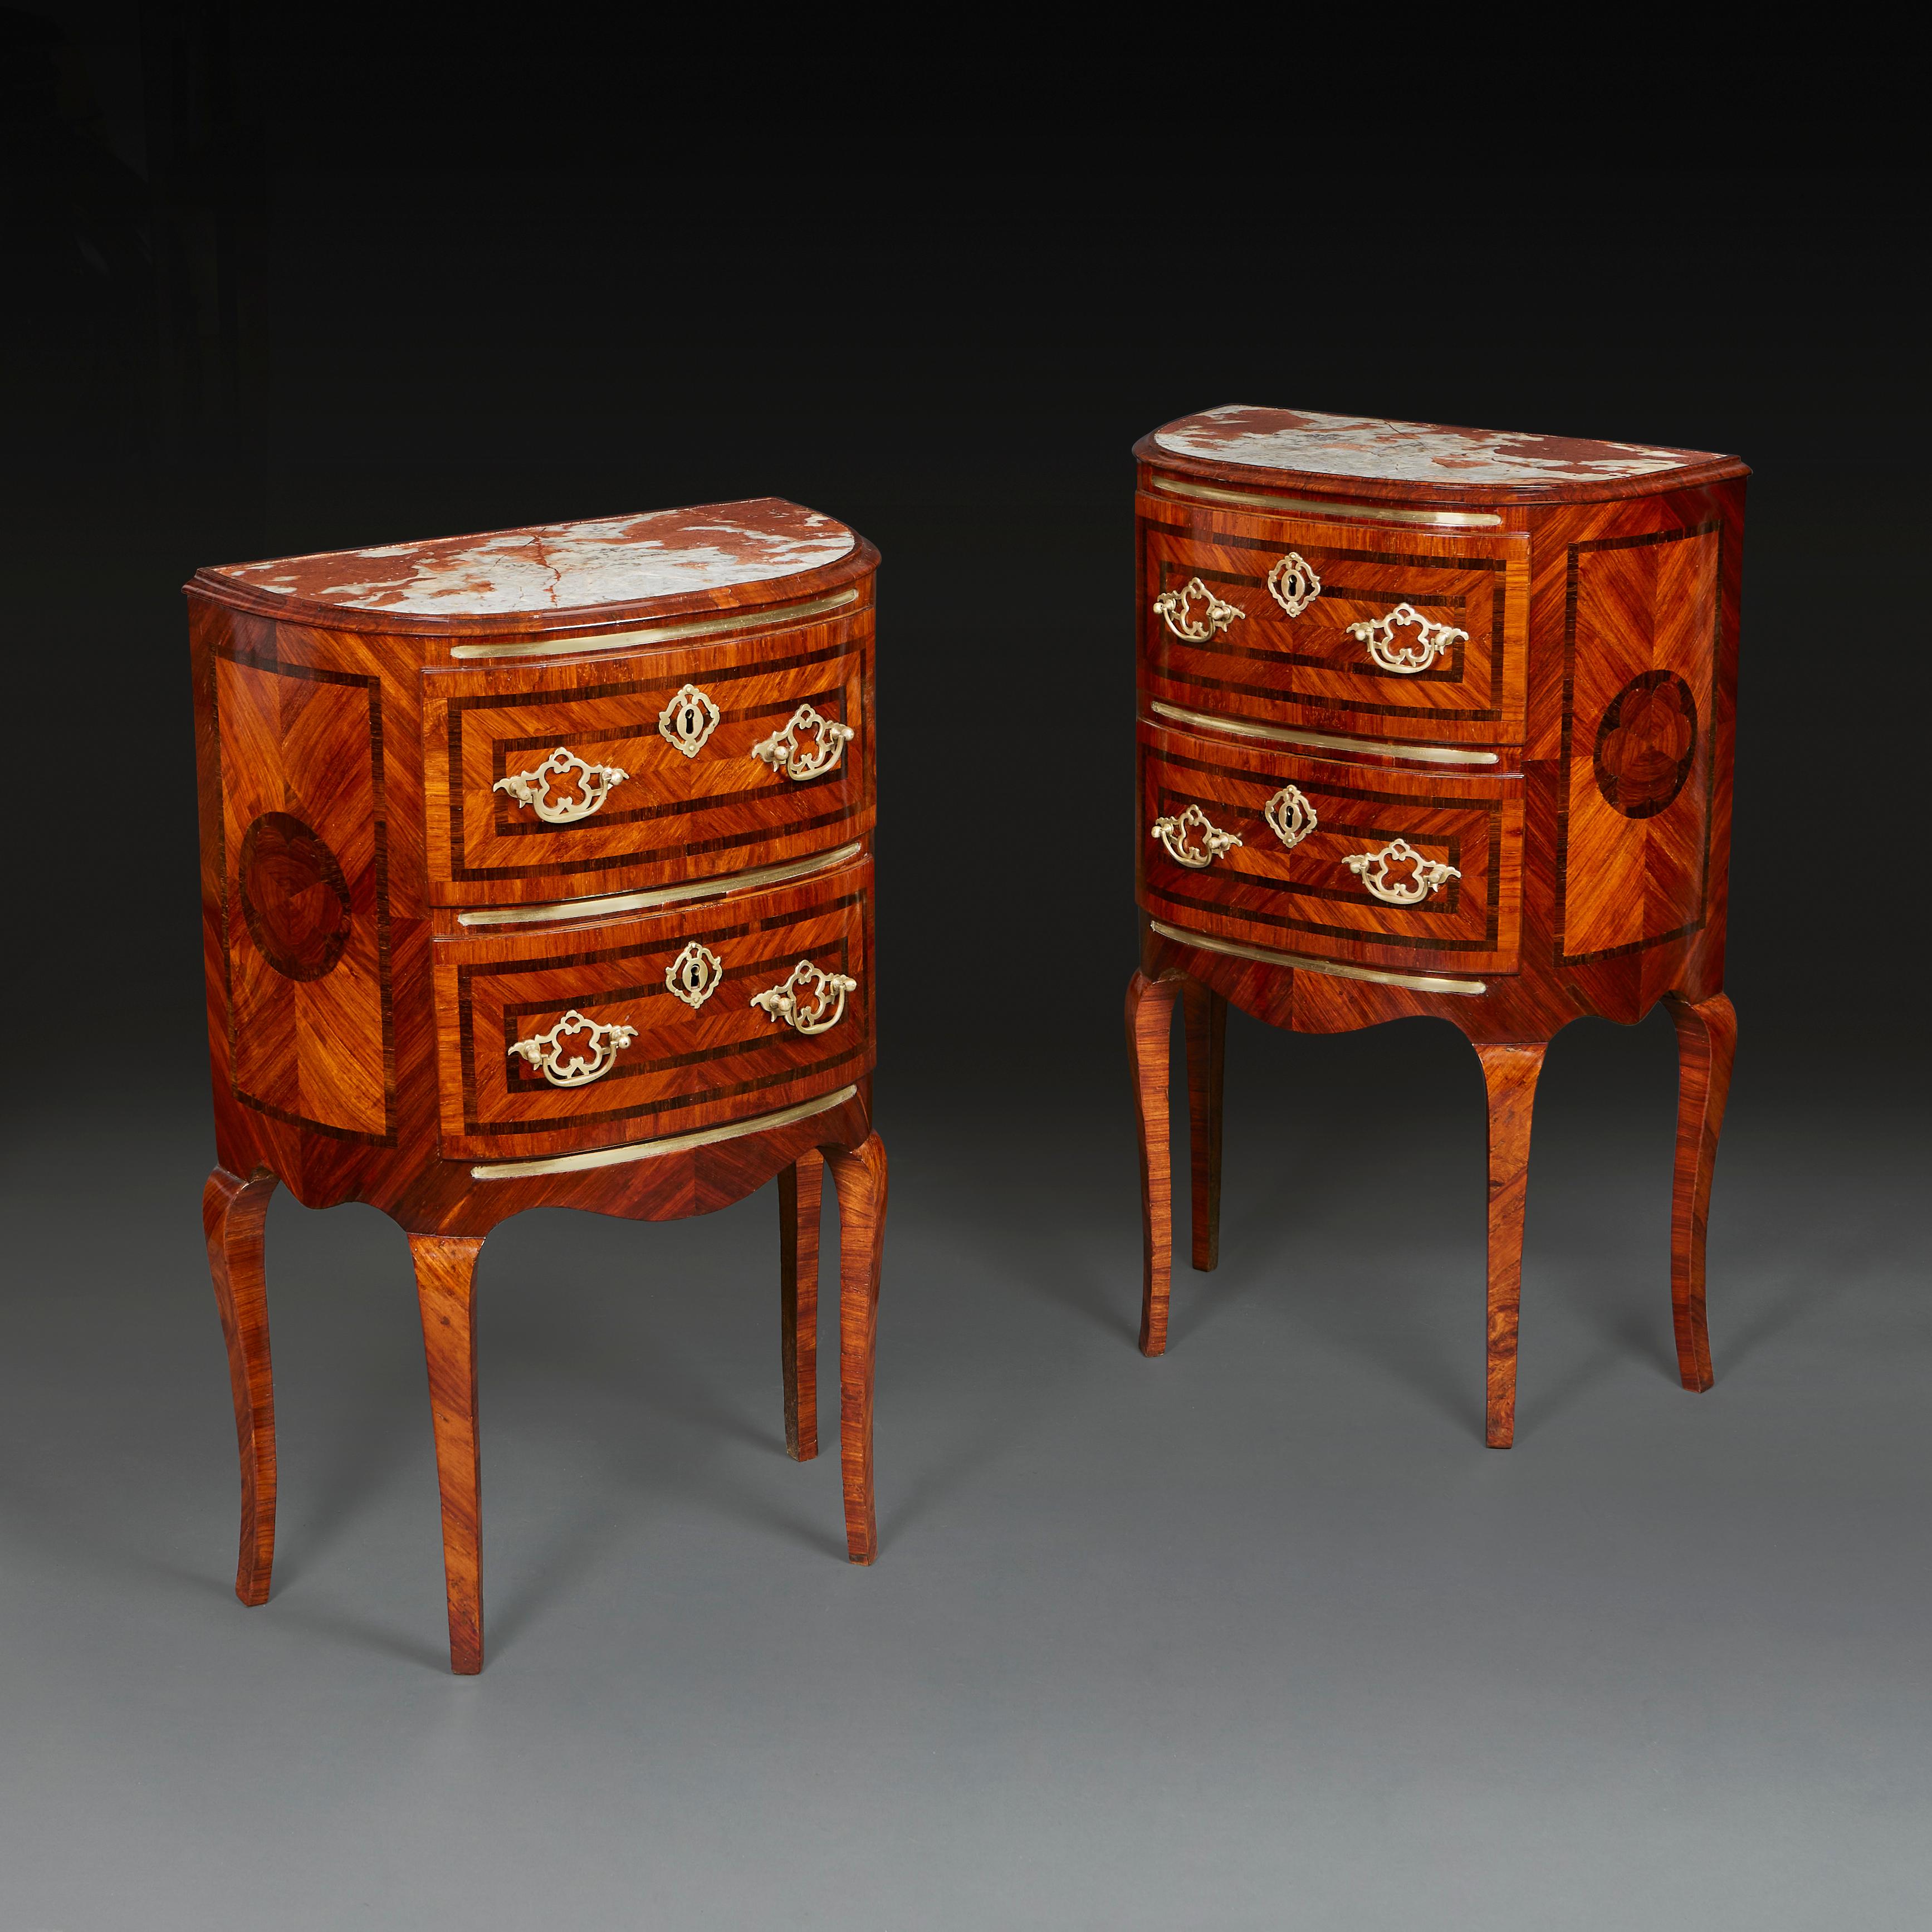 A fine pair of Roman marquetry bedside tables, with inset red and white marble tops, opening with two drawers to the front, with brass mounts, all supported on cabriole legs.